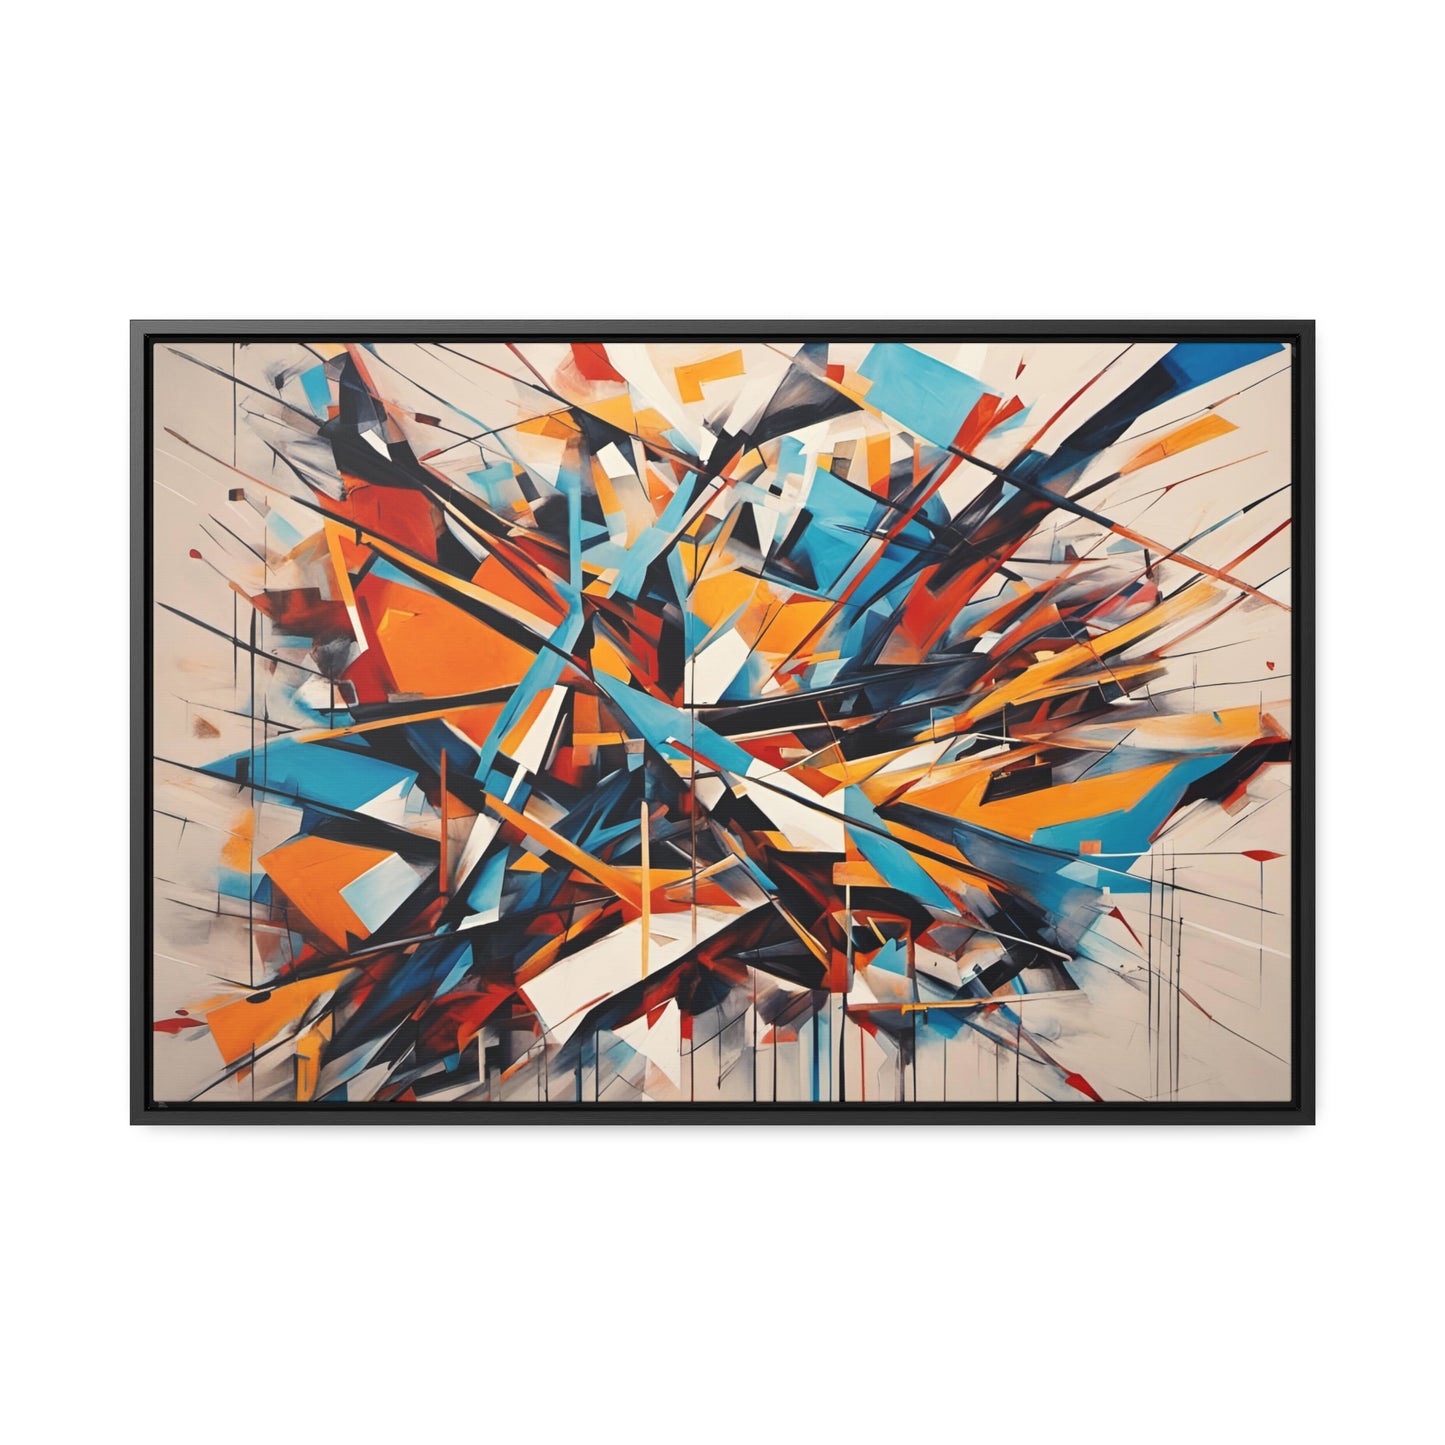 Abstract Art Wall Print - Multicolor Explosion  Print on Canvas in a Floating Frame